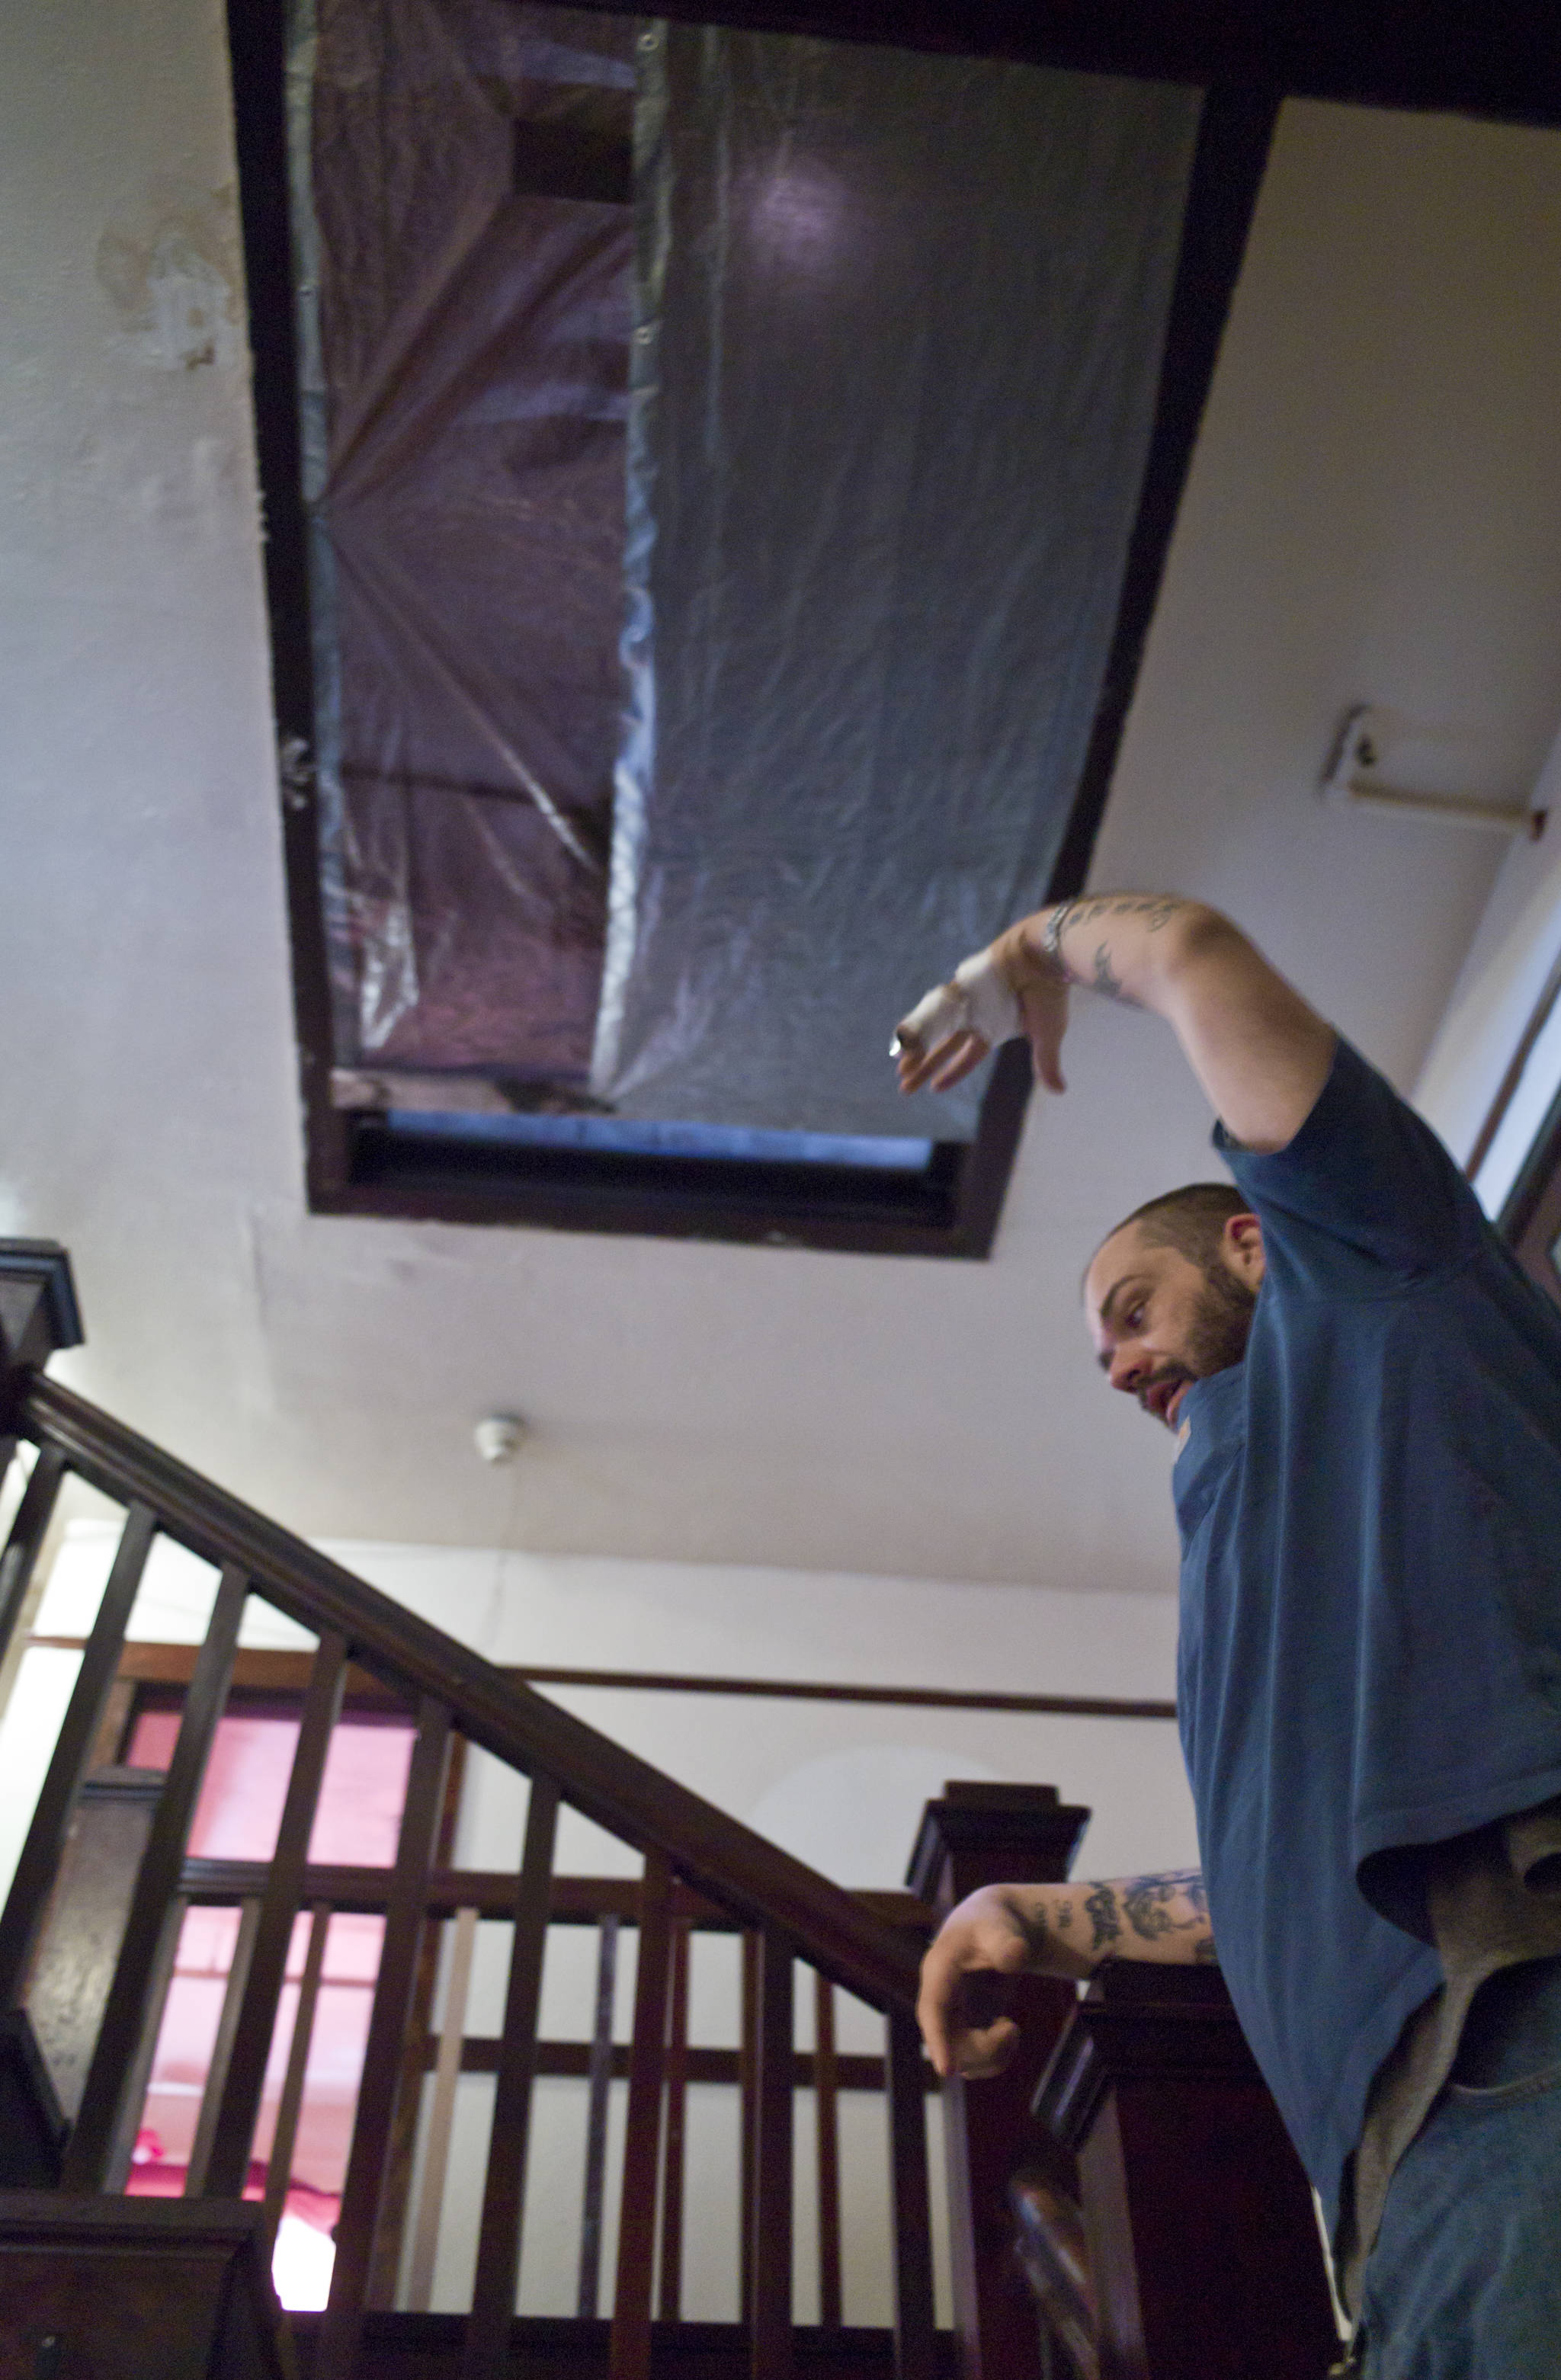 Rick Cotten talks about work done to close up the leaking skylight on Friday, May 5, 2017, before the Bergmann Hotel can reopen. The city closed the hotel on health and safety concerns in March. (Michael Penn | Juneau Empire)